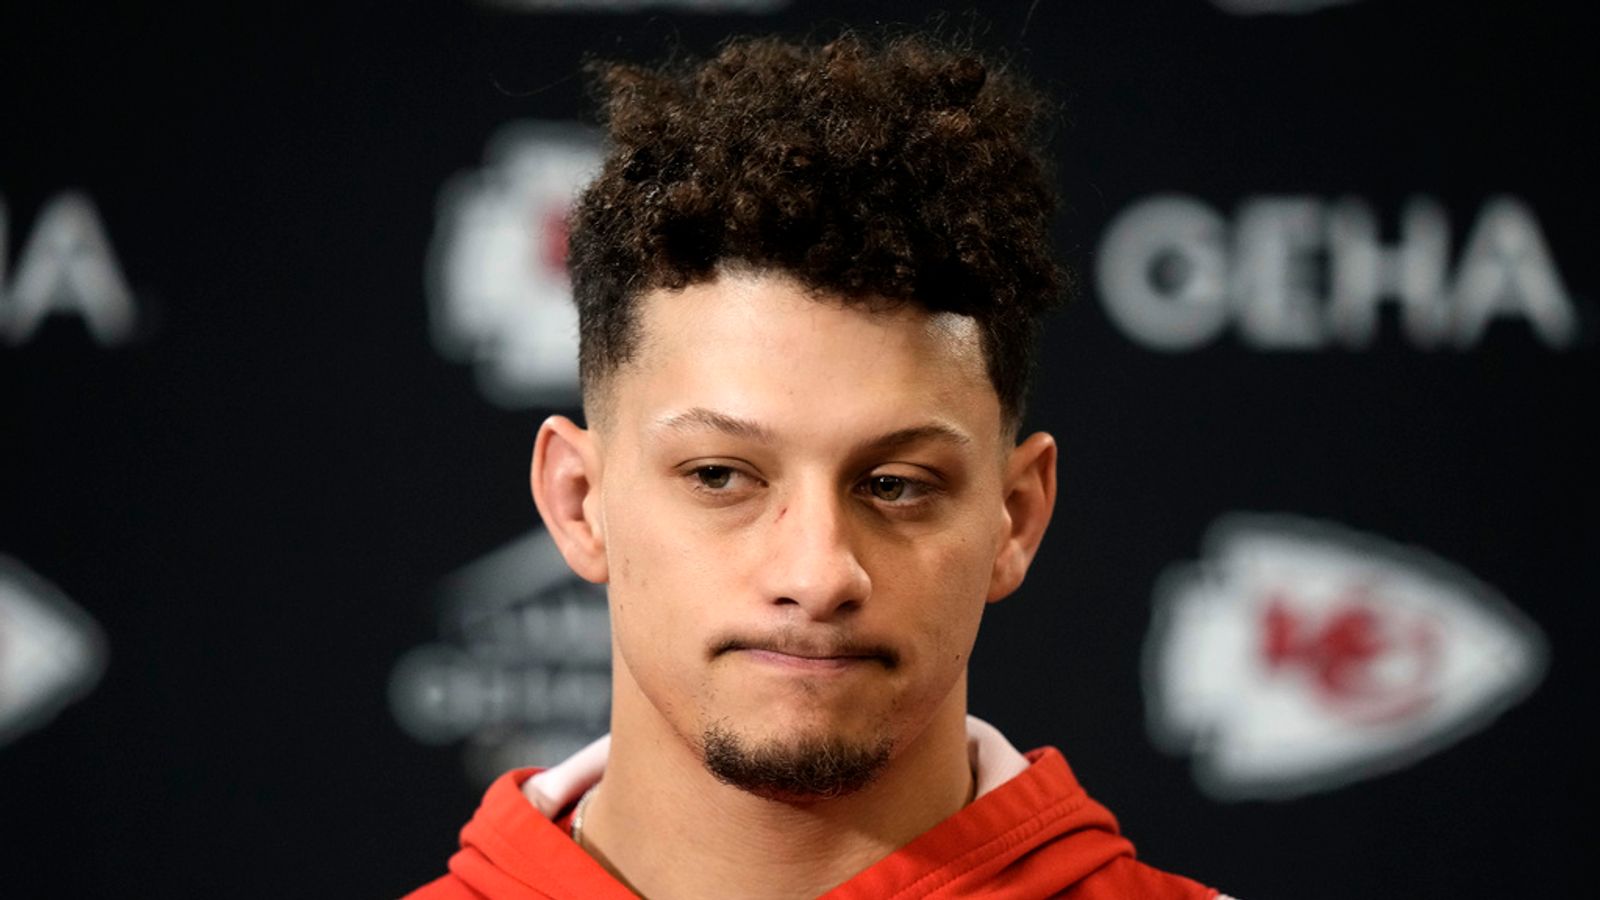 Father of Patrick Mahomes charged with driving while intoxicated - days before the Super Bowl